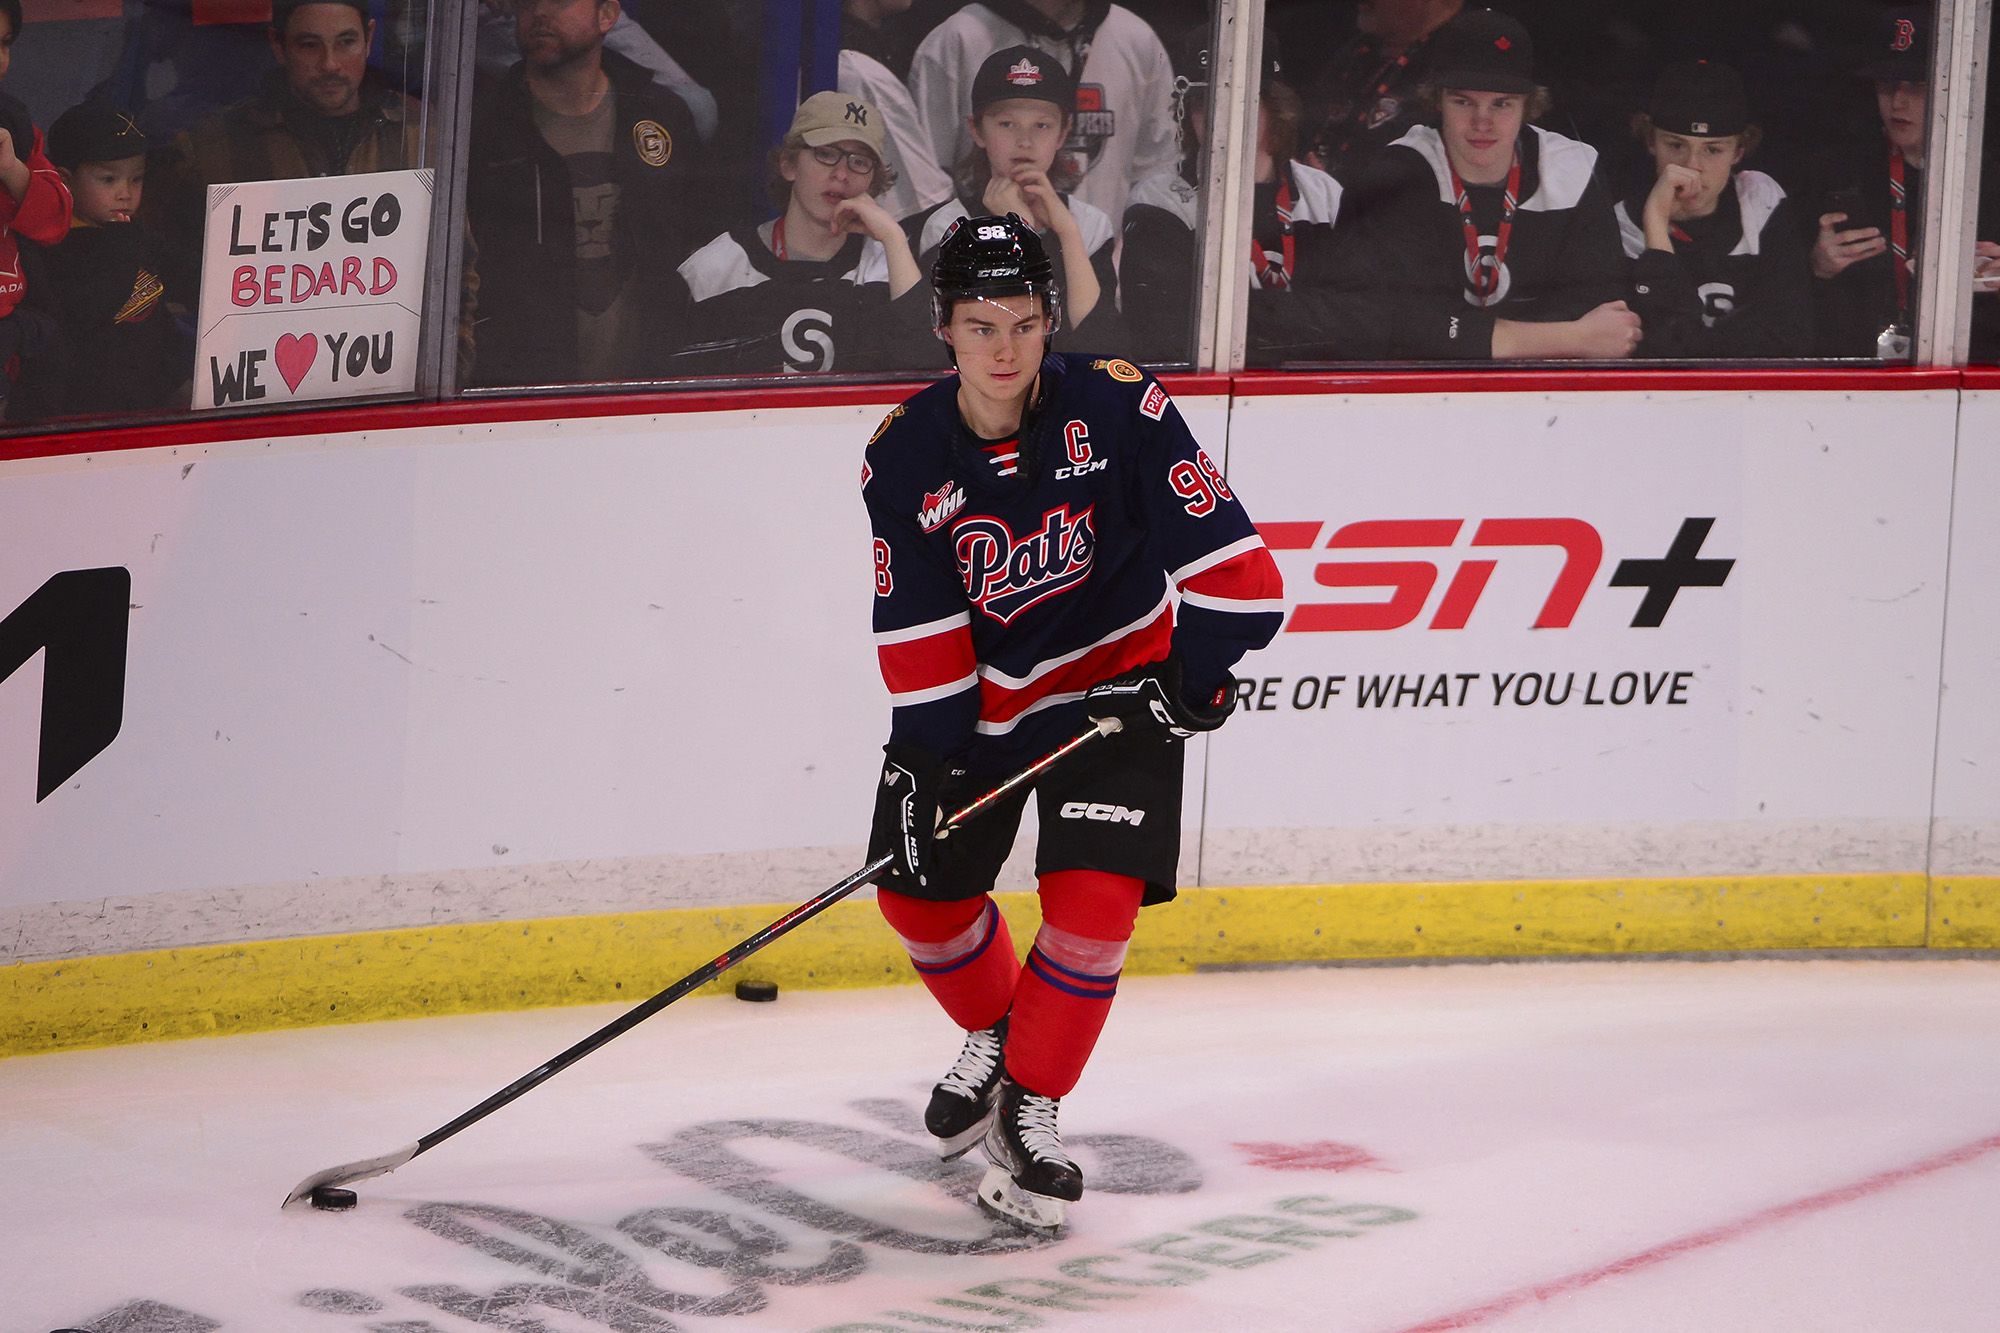 Review of Anaheim Ducks prospects at the World Junior